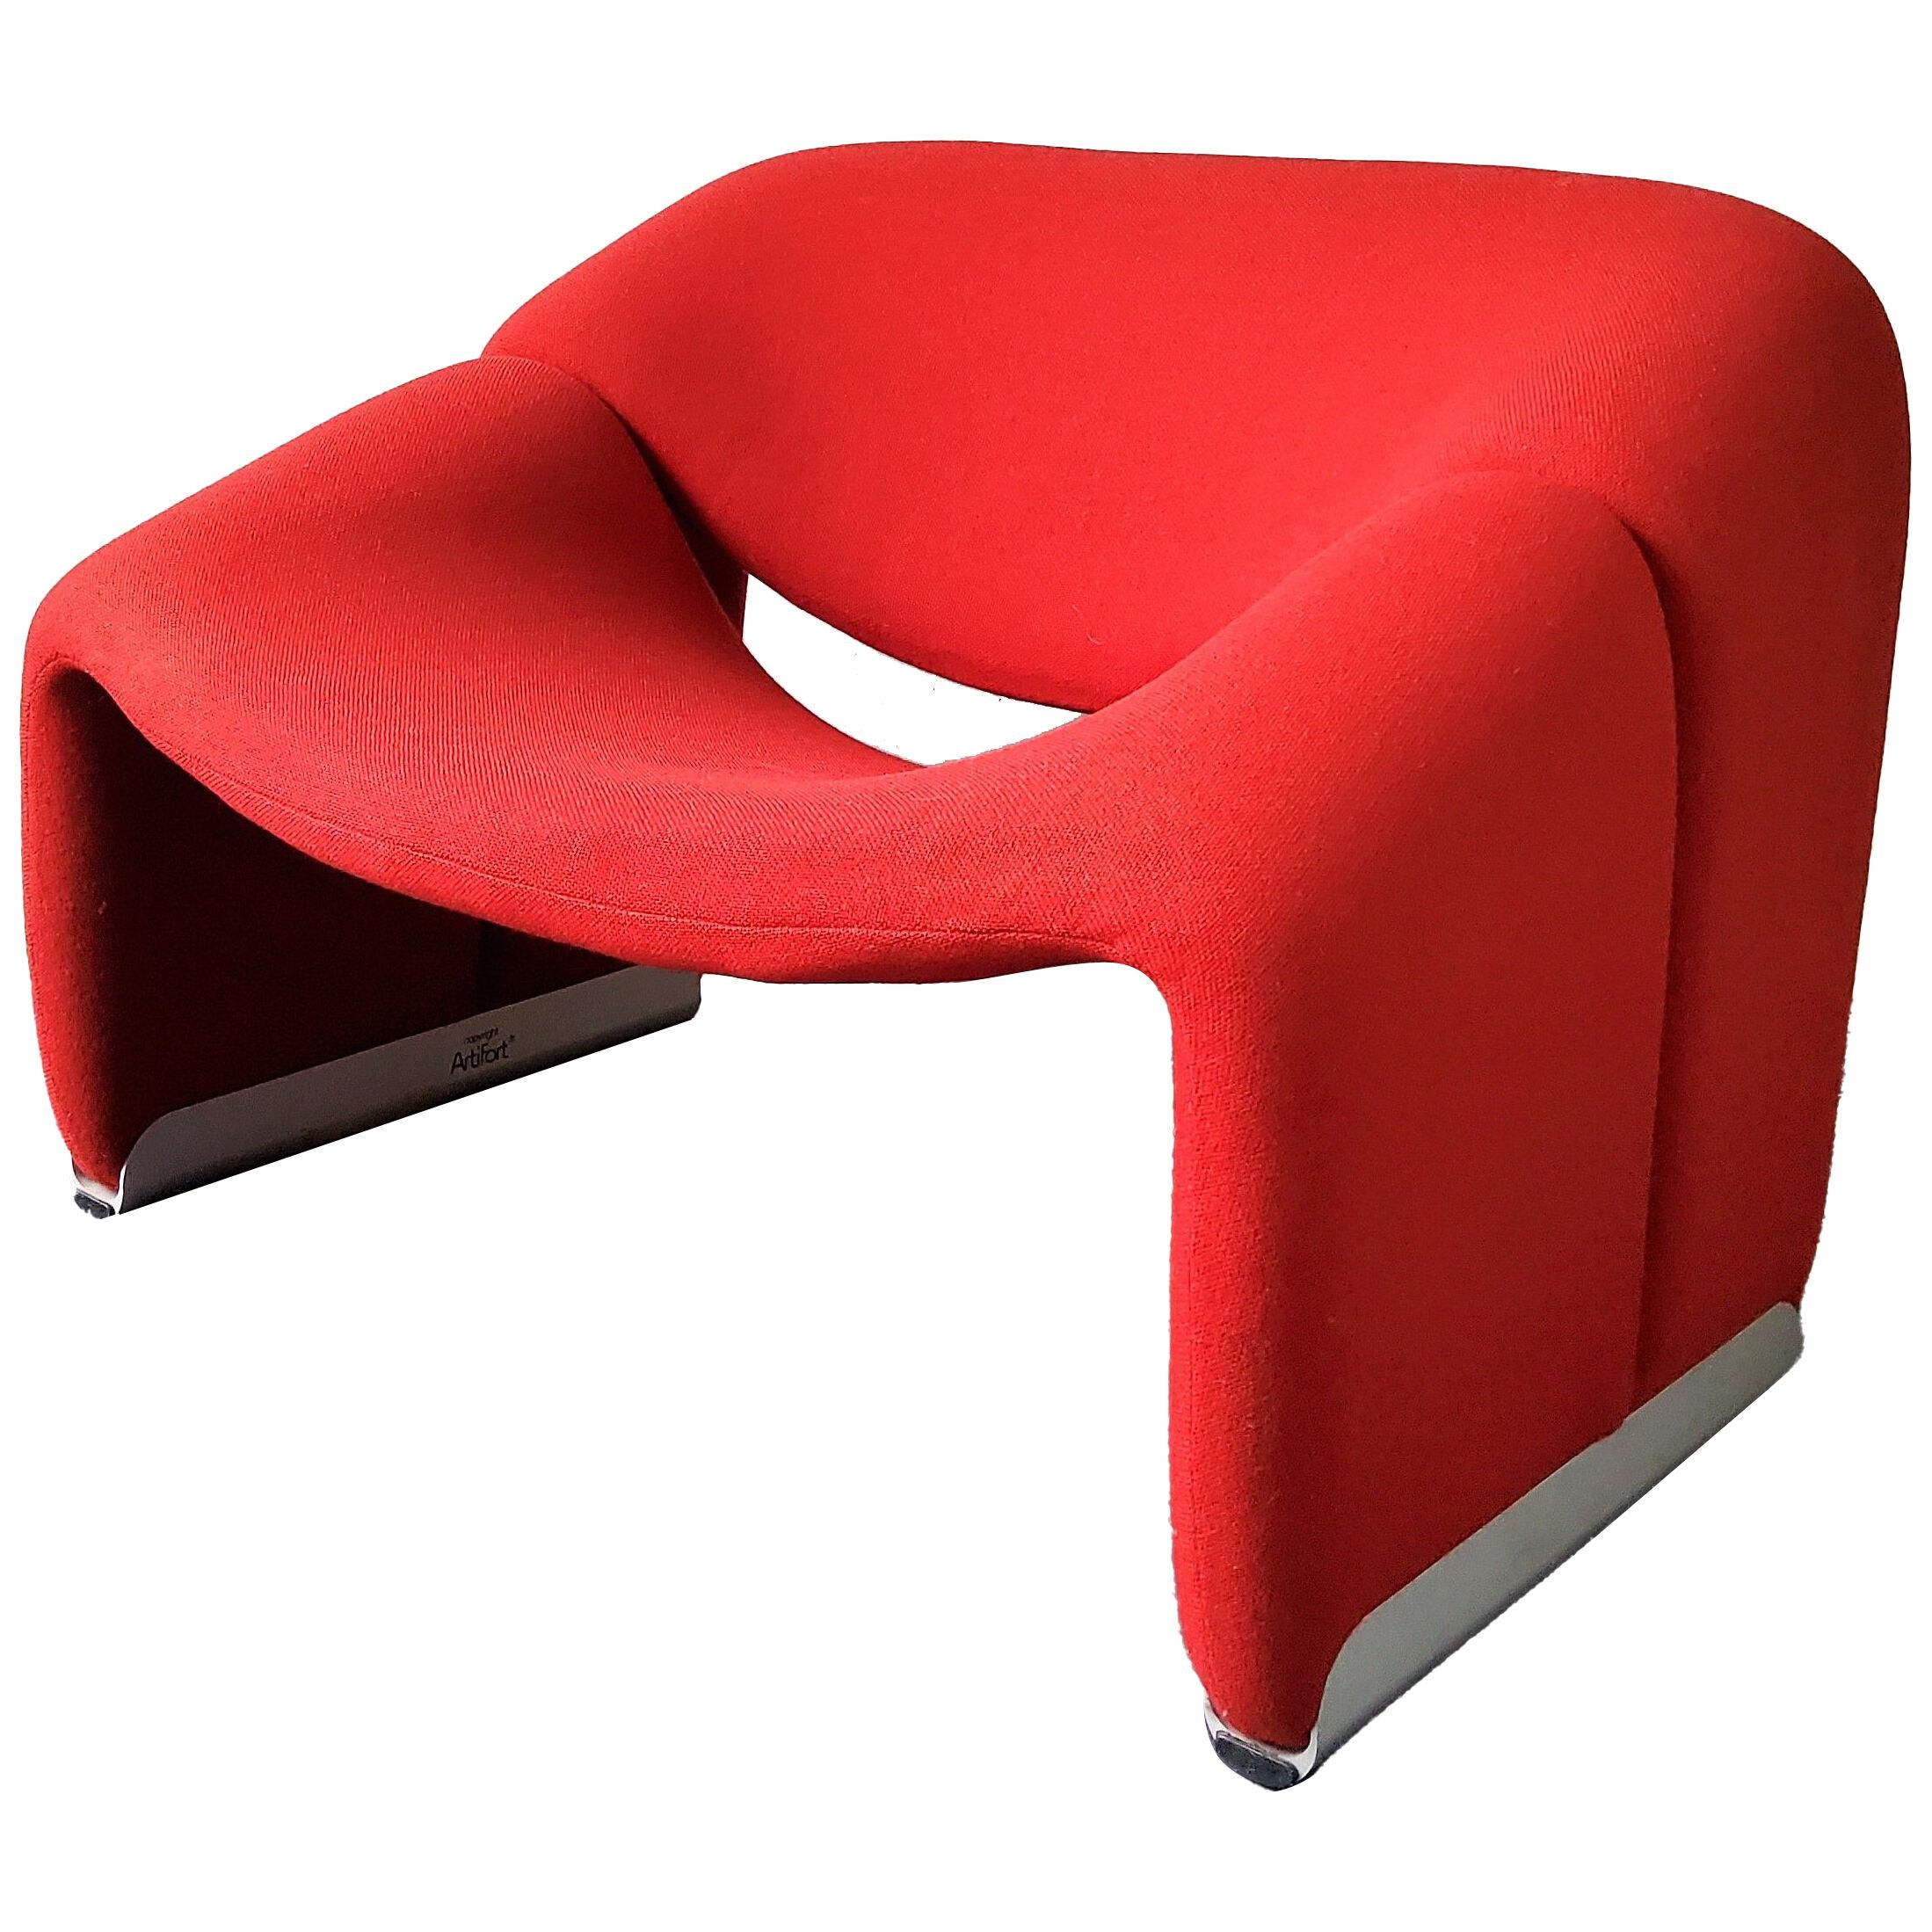 Vintage 'Groovy' or F598 Lounge Chair in red by Pierre Paulin for Artifort